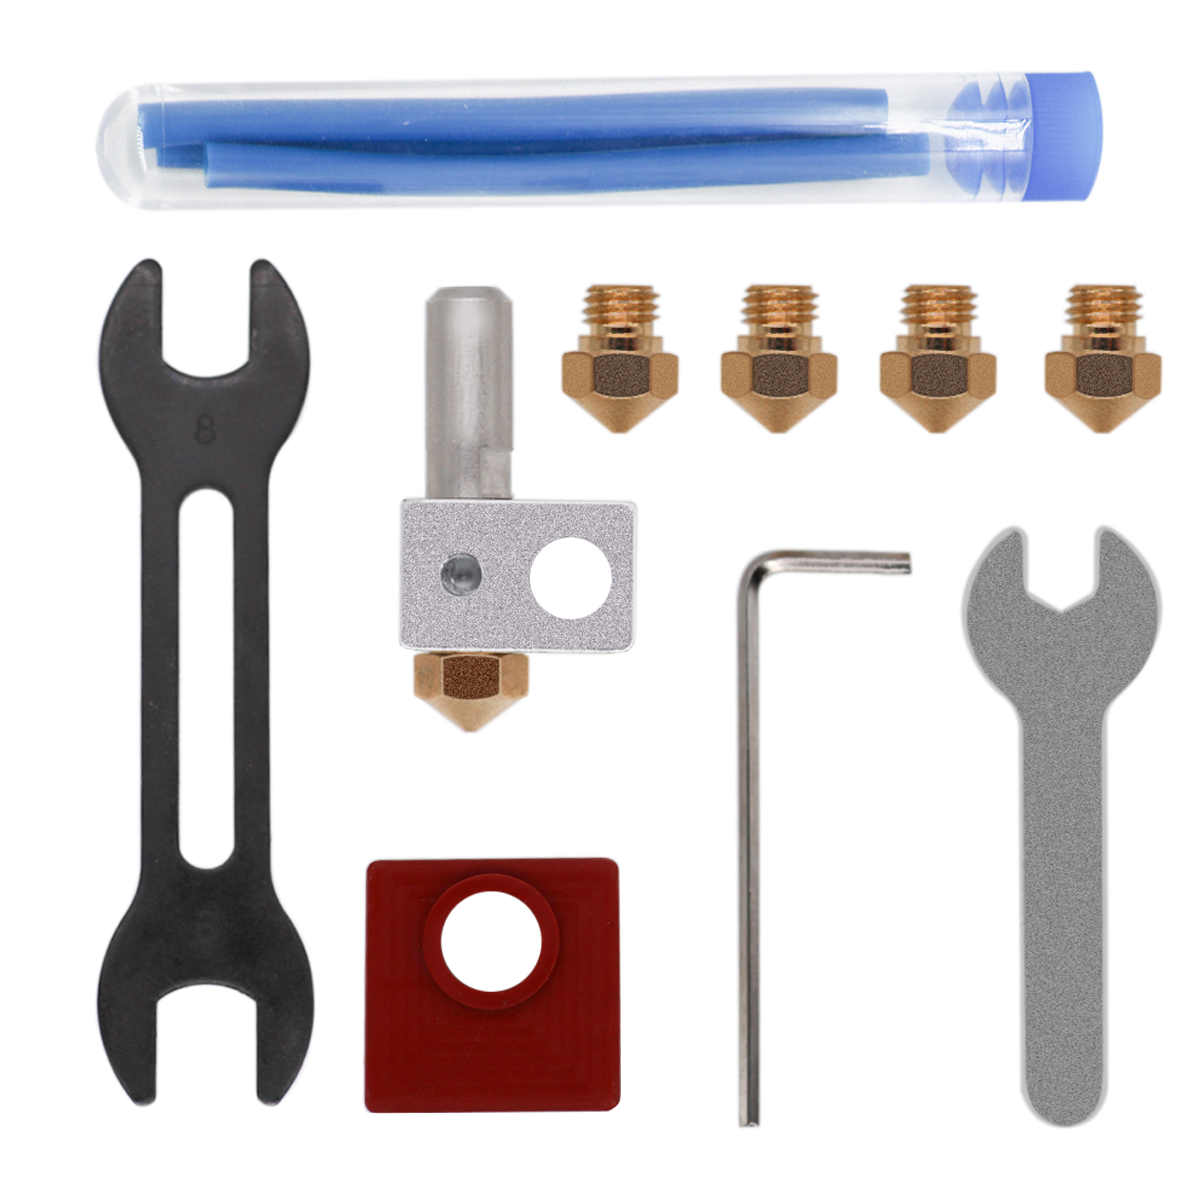 

MK10 All Metal Hotend Kit withMK10 Extruder+0.4mm+0.6mm Brass Nozzle+PTFE Tube+Wrench Set for 3D Printer